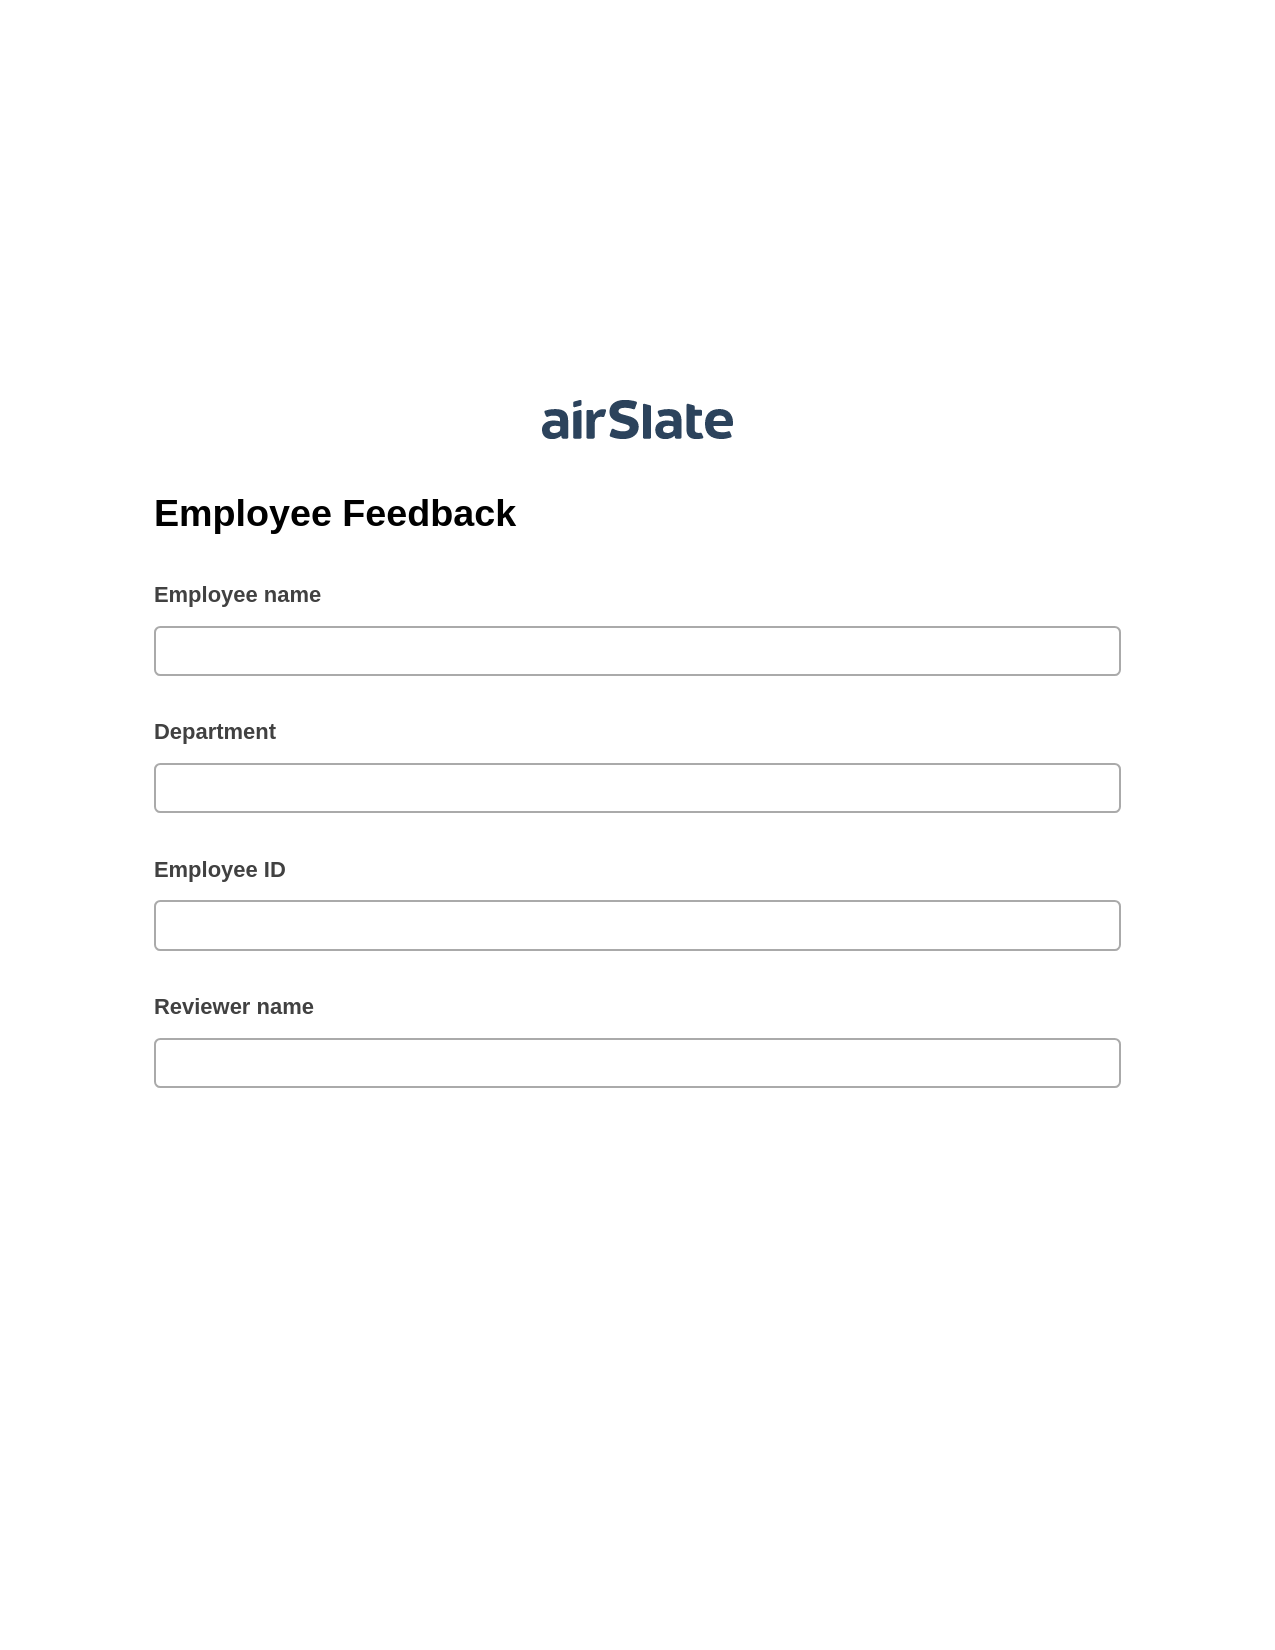 Employee Feedback Pre-fill Slate from MS Dynamics 365 Records Bot, Update NetSuite Records Bot, Post-finish Document Bot